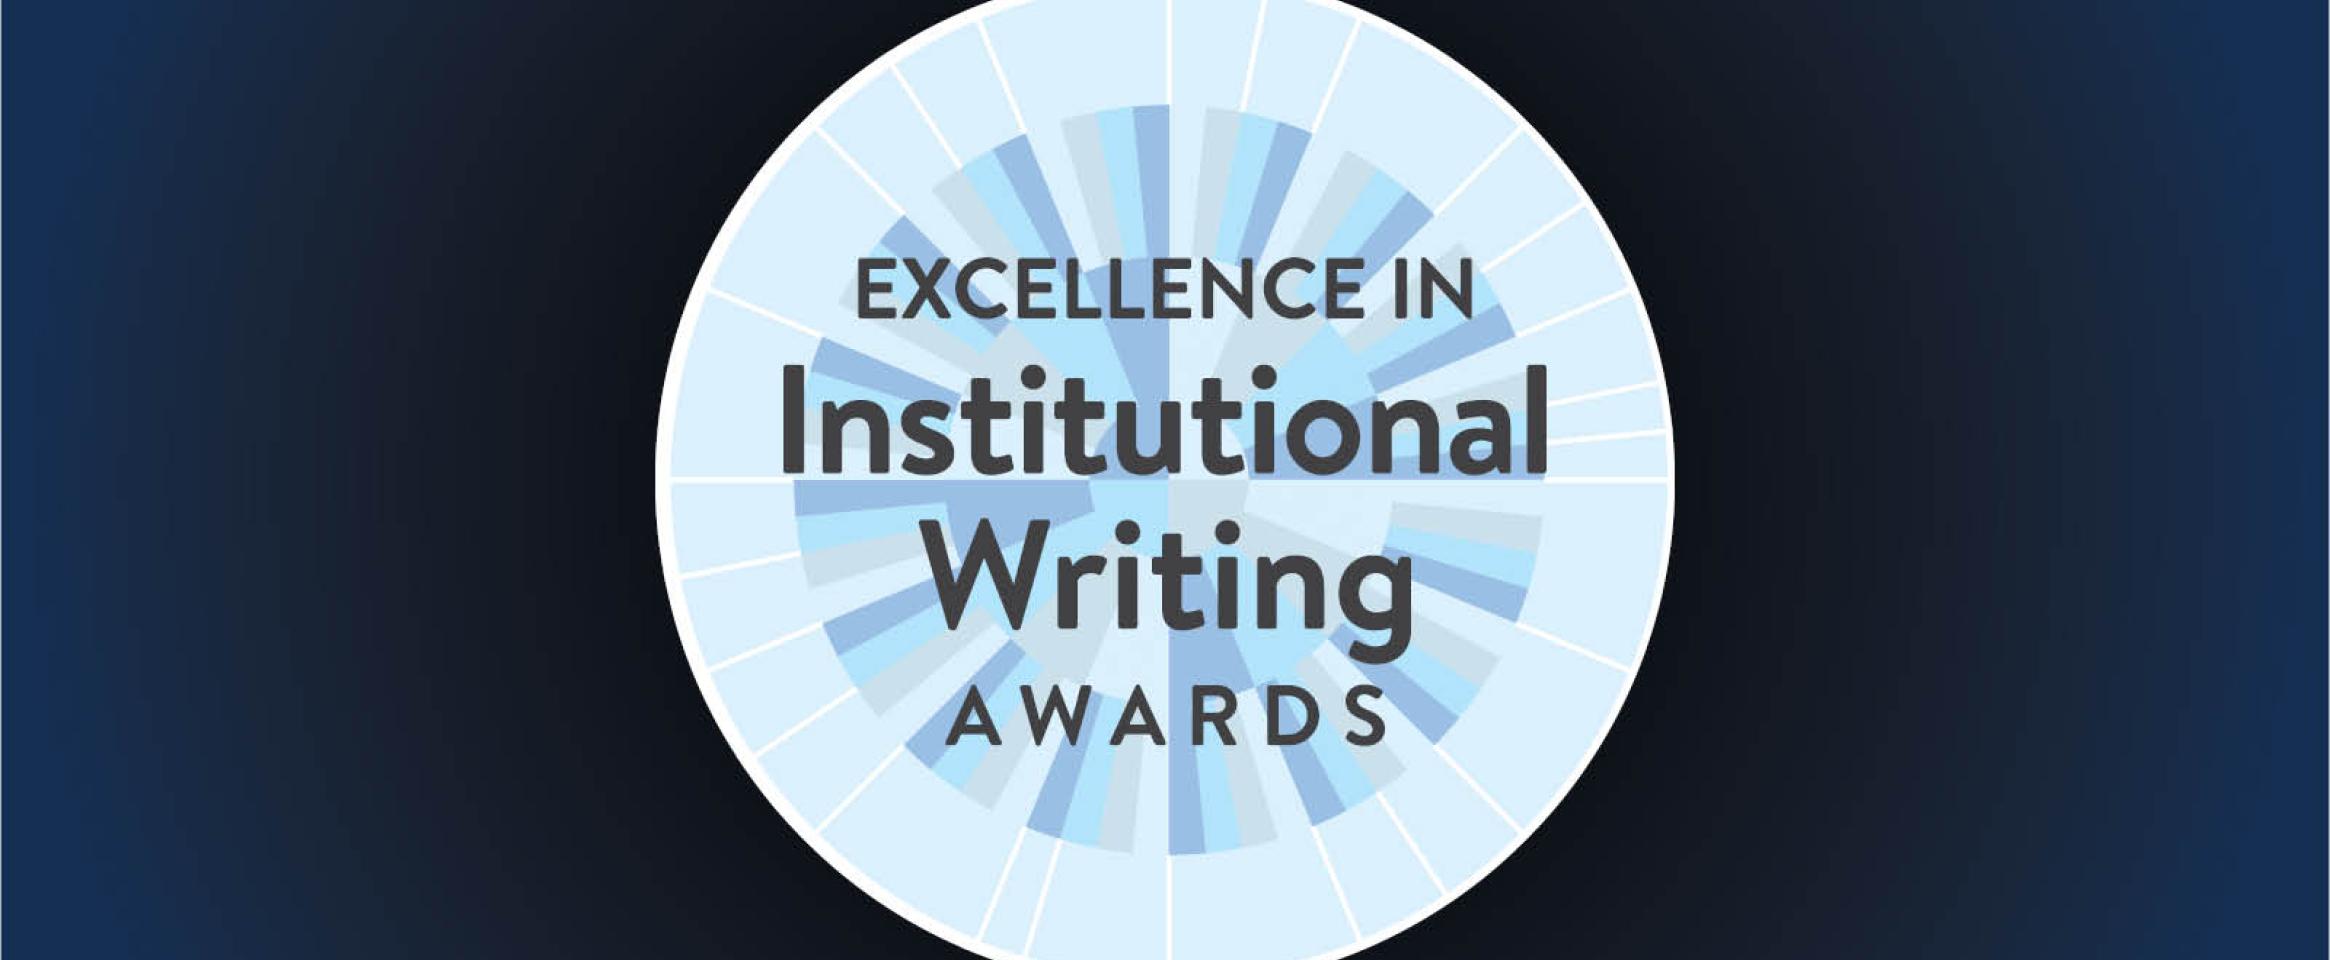 Graphic with circular logo of the N A S W Excellence in Institutional Writing Awards, which somewhat resembles a rosette or a plasmid diagram. The logo is set against a radiating gradient pattern, evoking the sense of knowledge diving deep into the unknown.